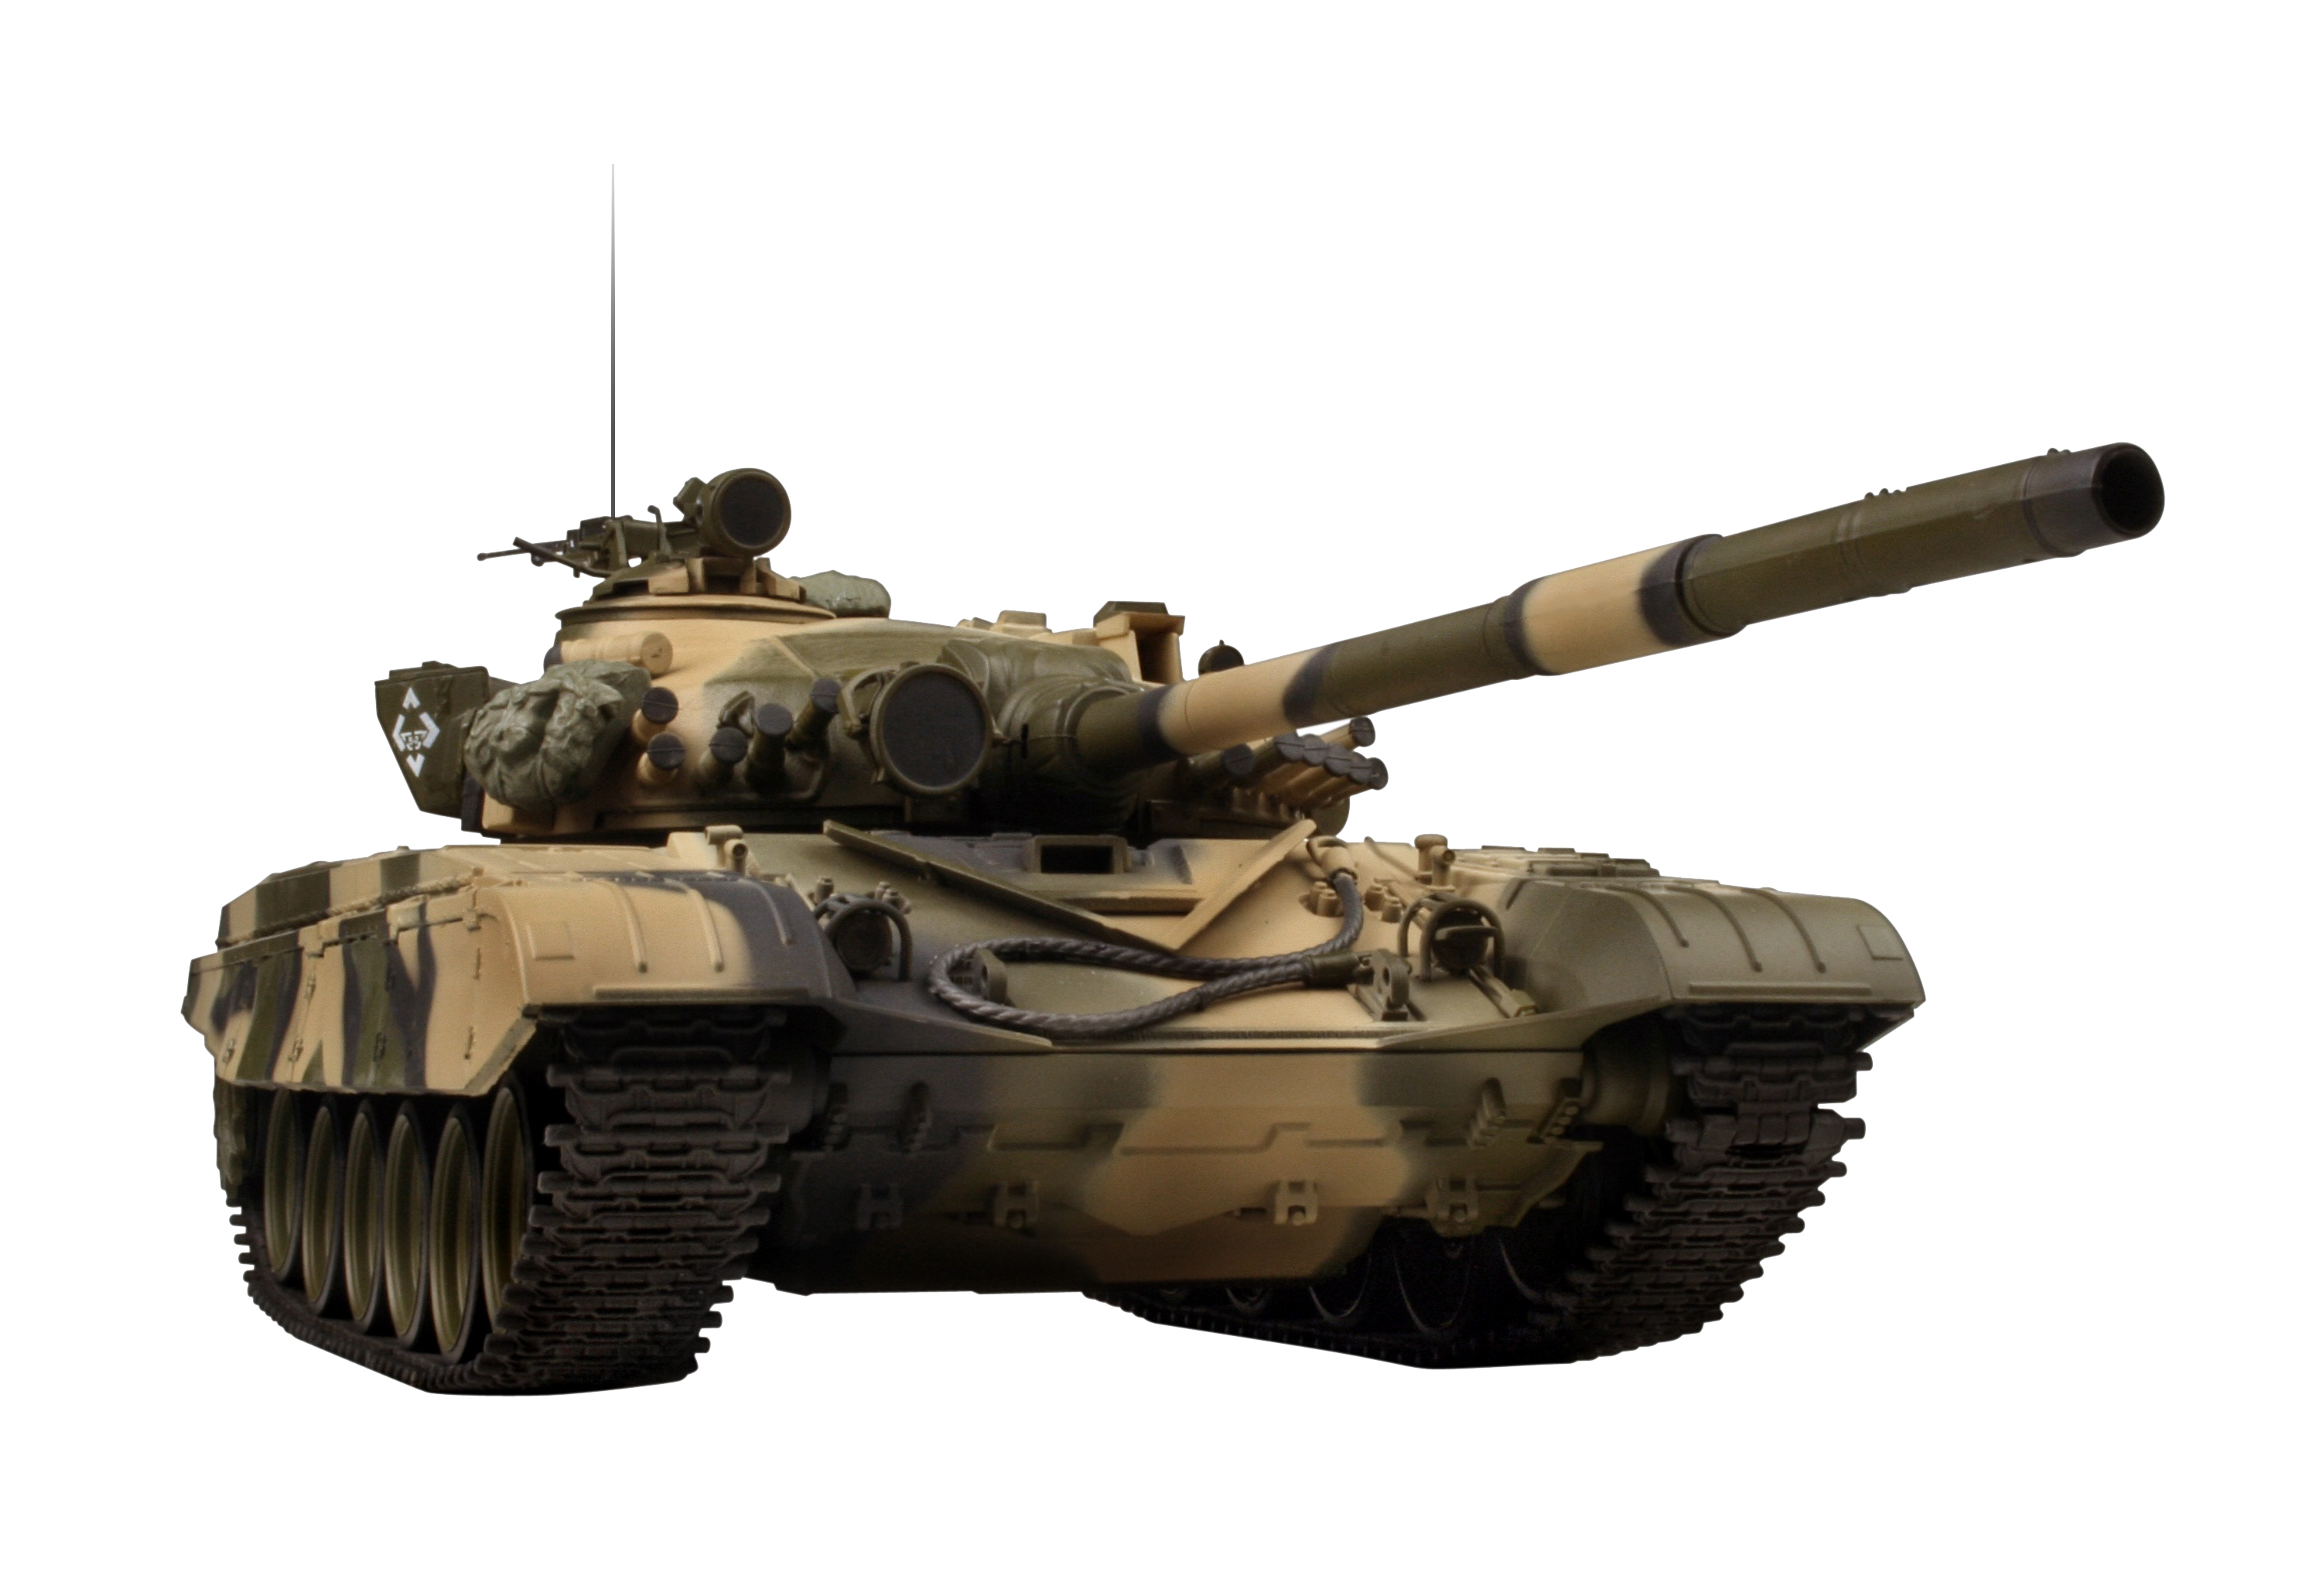 Military Tank PNG Image in High Definition pngteam.com